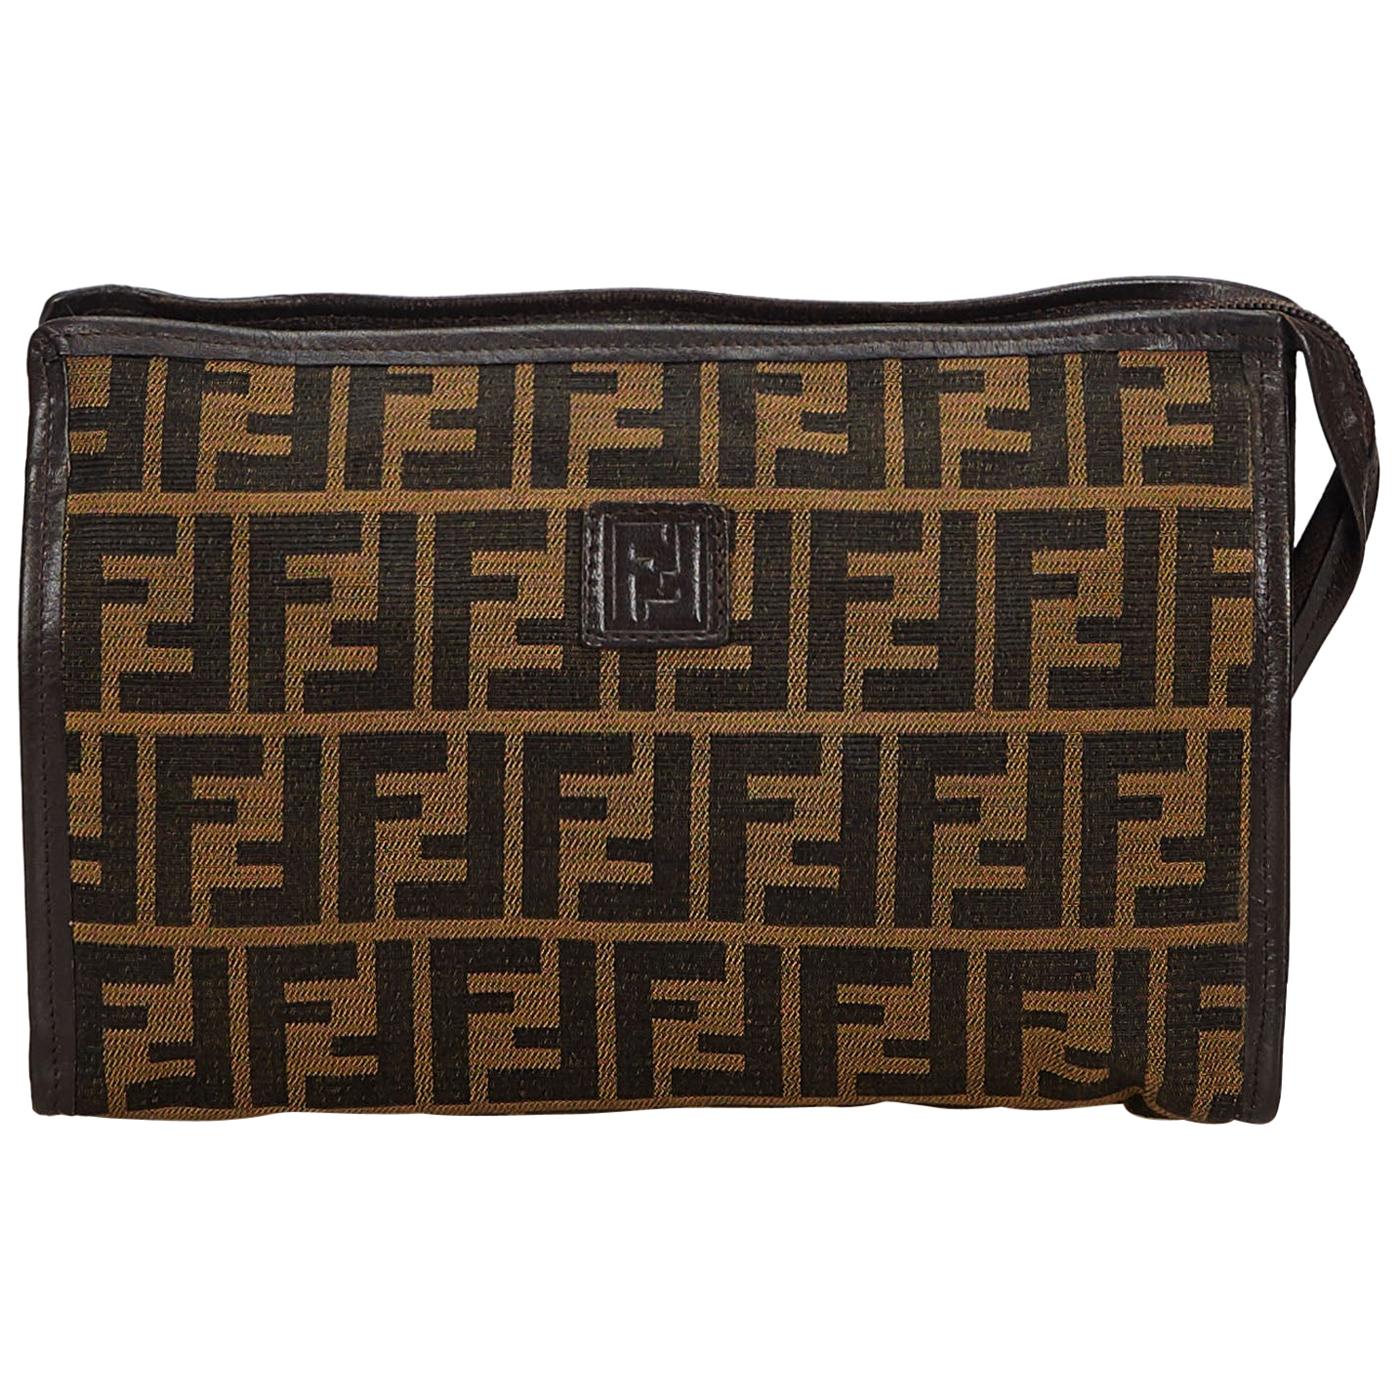 Vintage Authentic Fendi Brown Canvas Fabric Zucca Clutch Bag Italy SMALL 